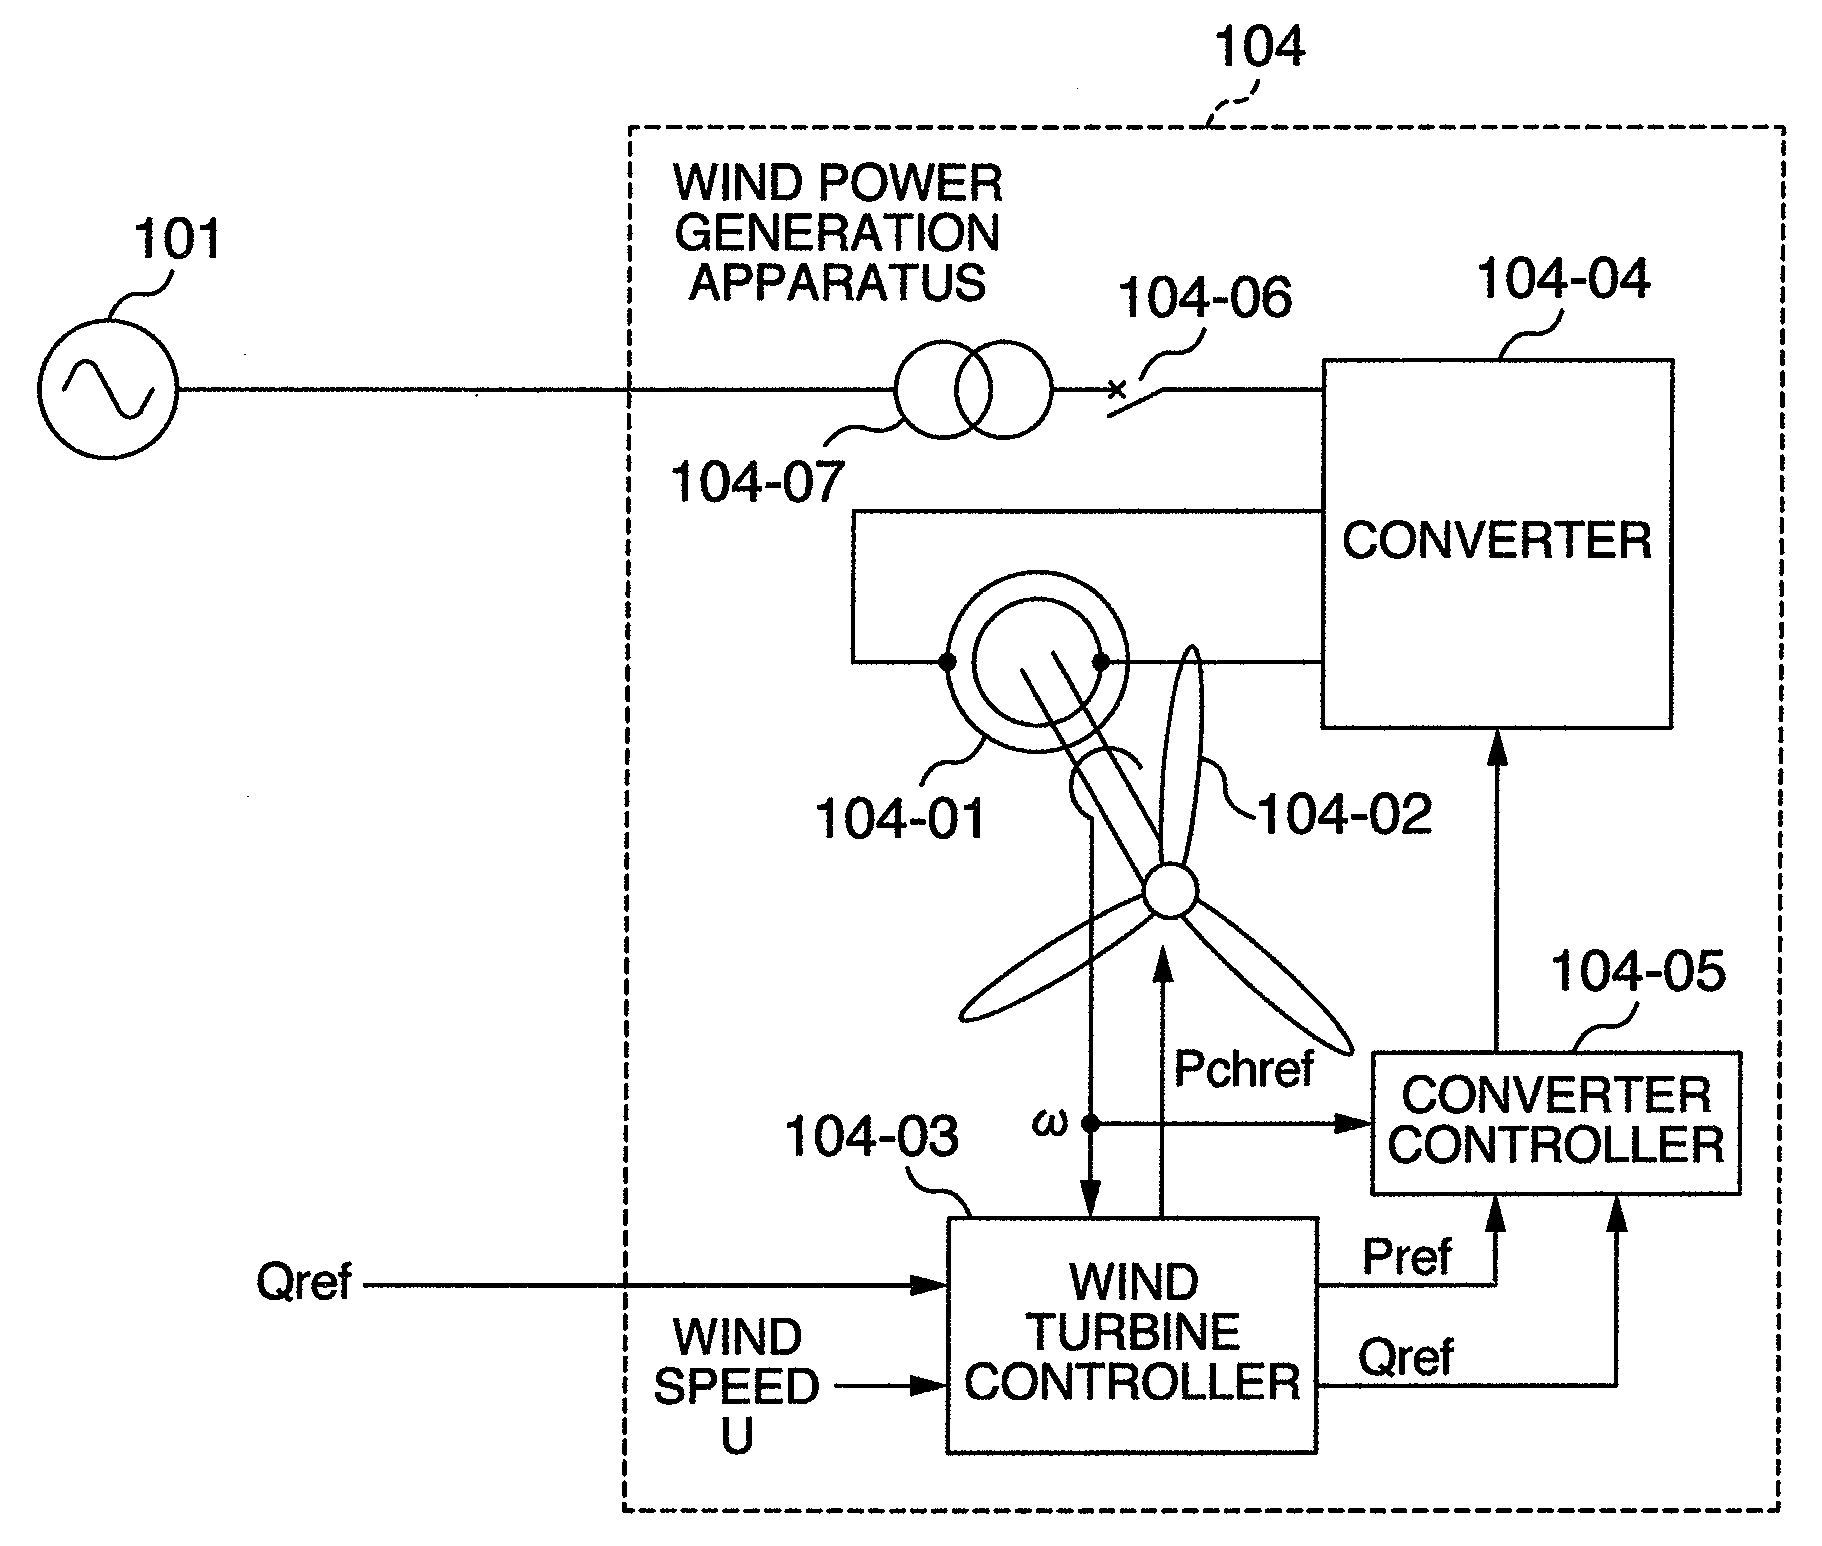 Variable speed wind power generation system